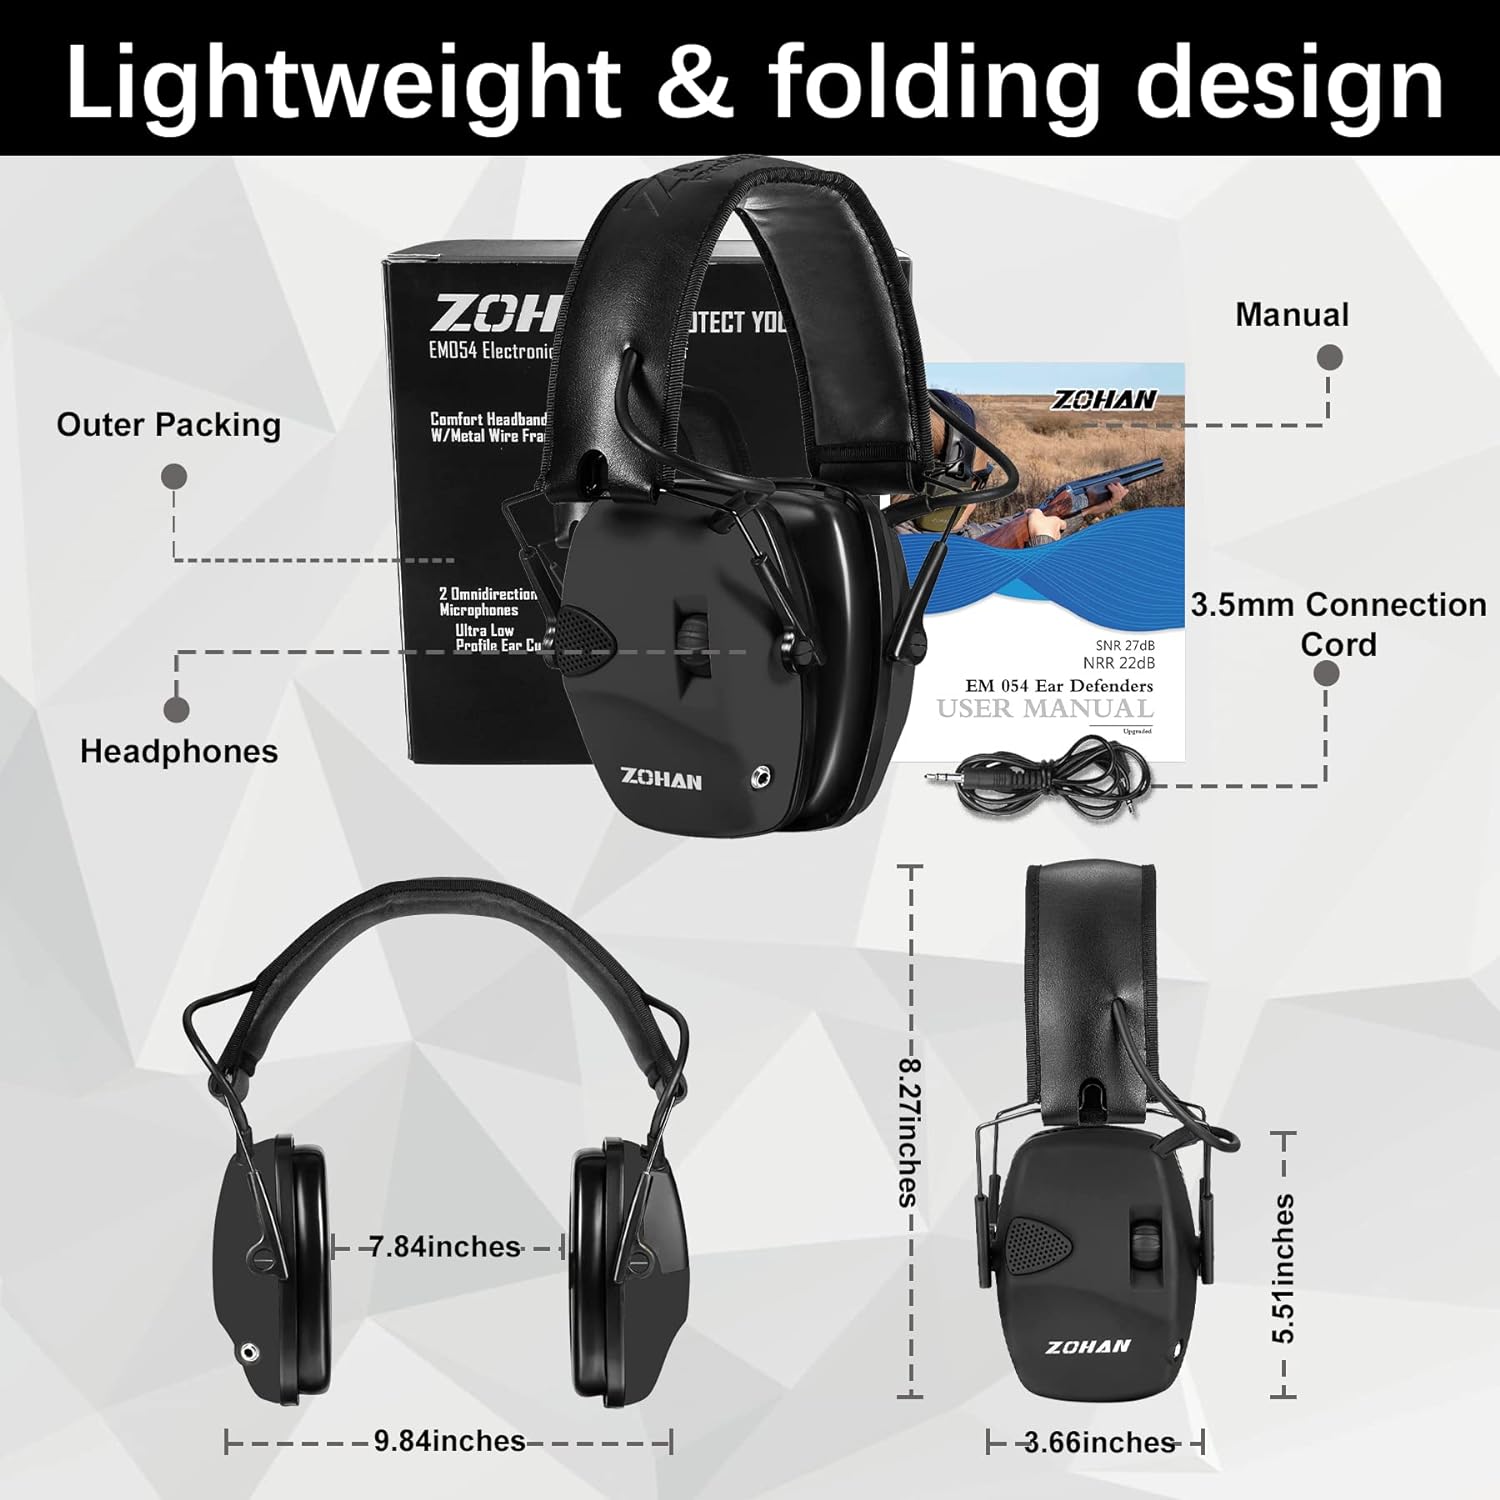 ZOHAN EM054 Electronic Ear Protection for Shooting Range with Sound Amplification Noise Reduction, Ear Muffs for Gun Range (Black-GJ)